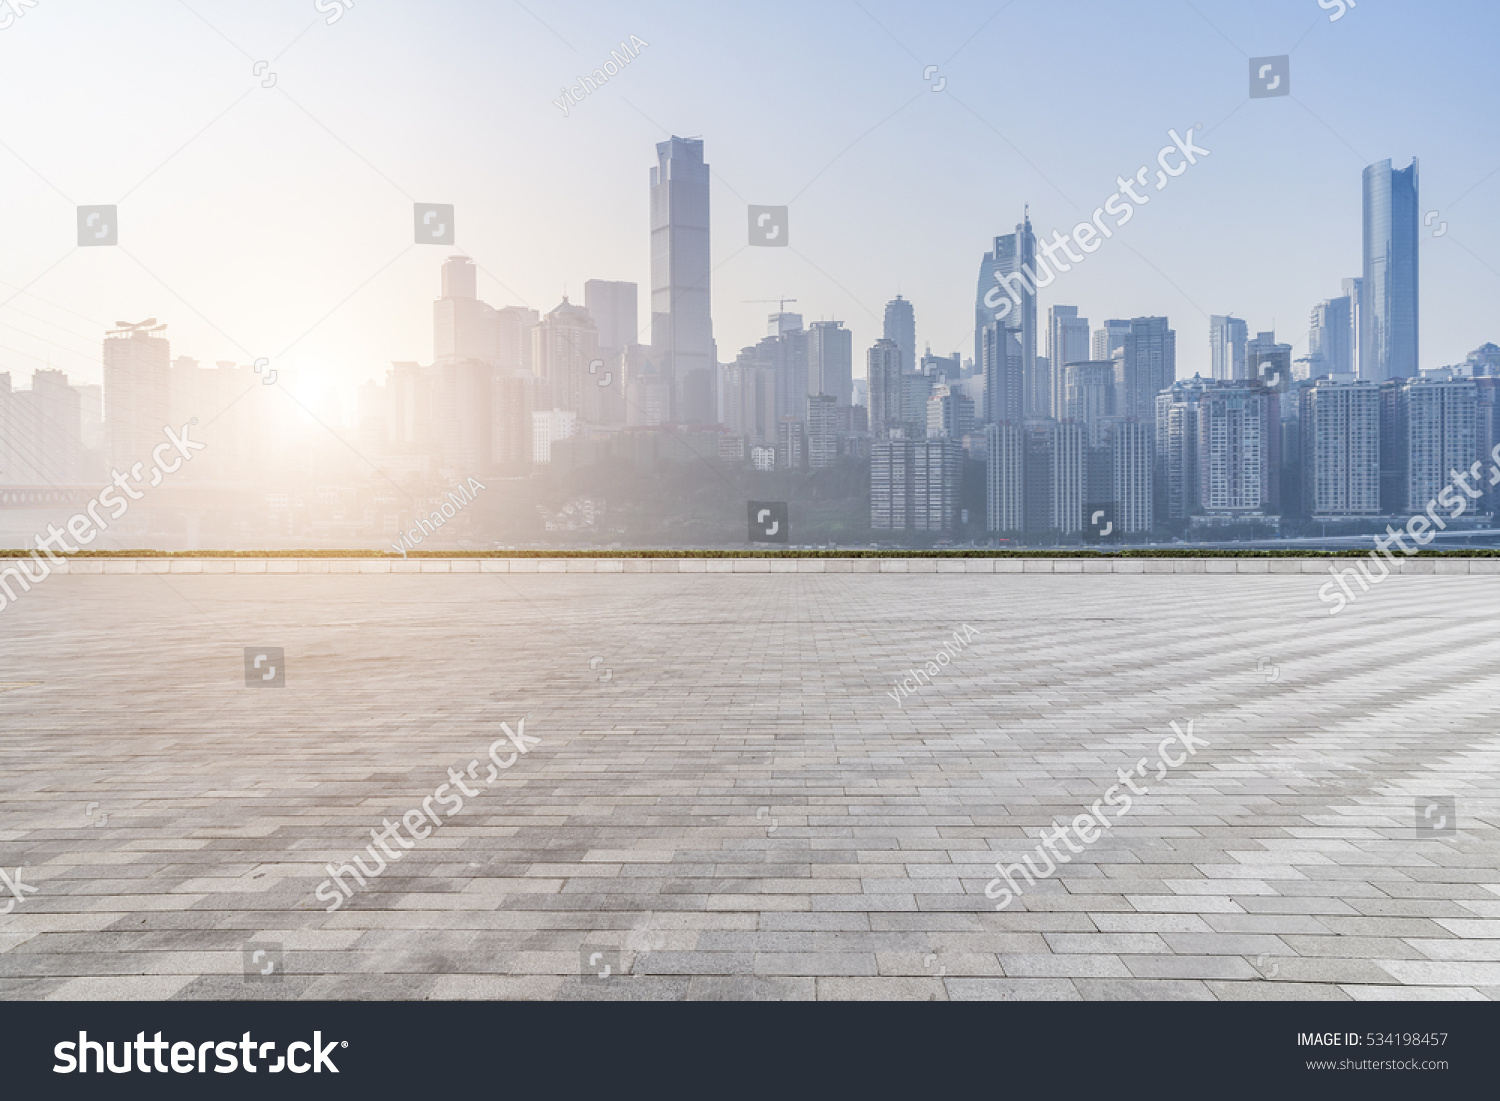 cityscape and skyline of chongqing in cloud sky on view from empty floor #534198457